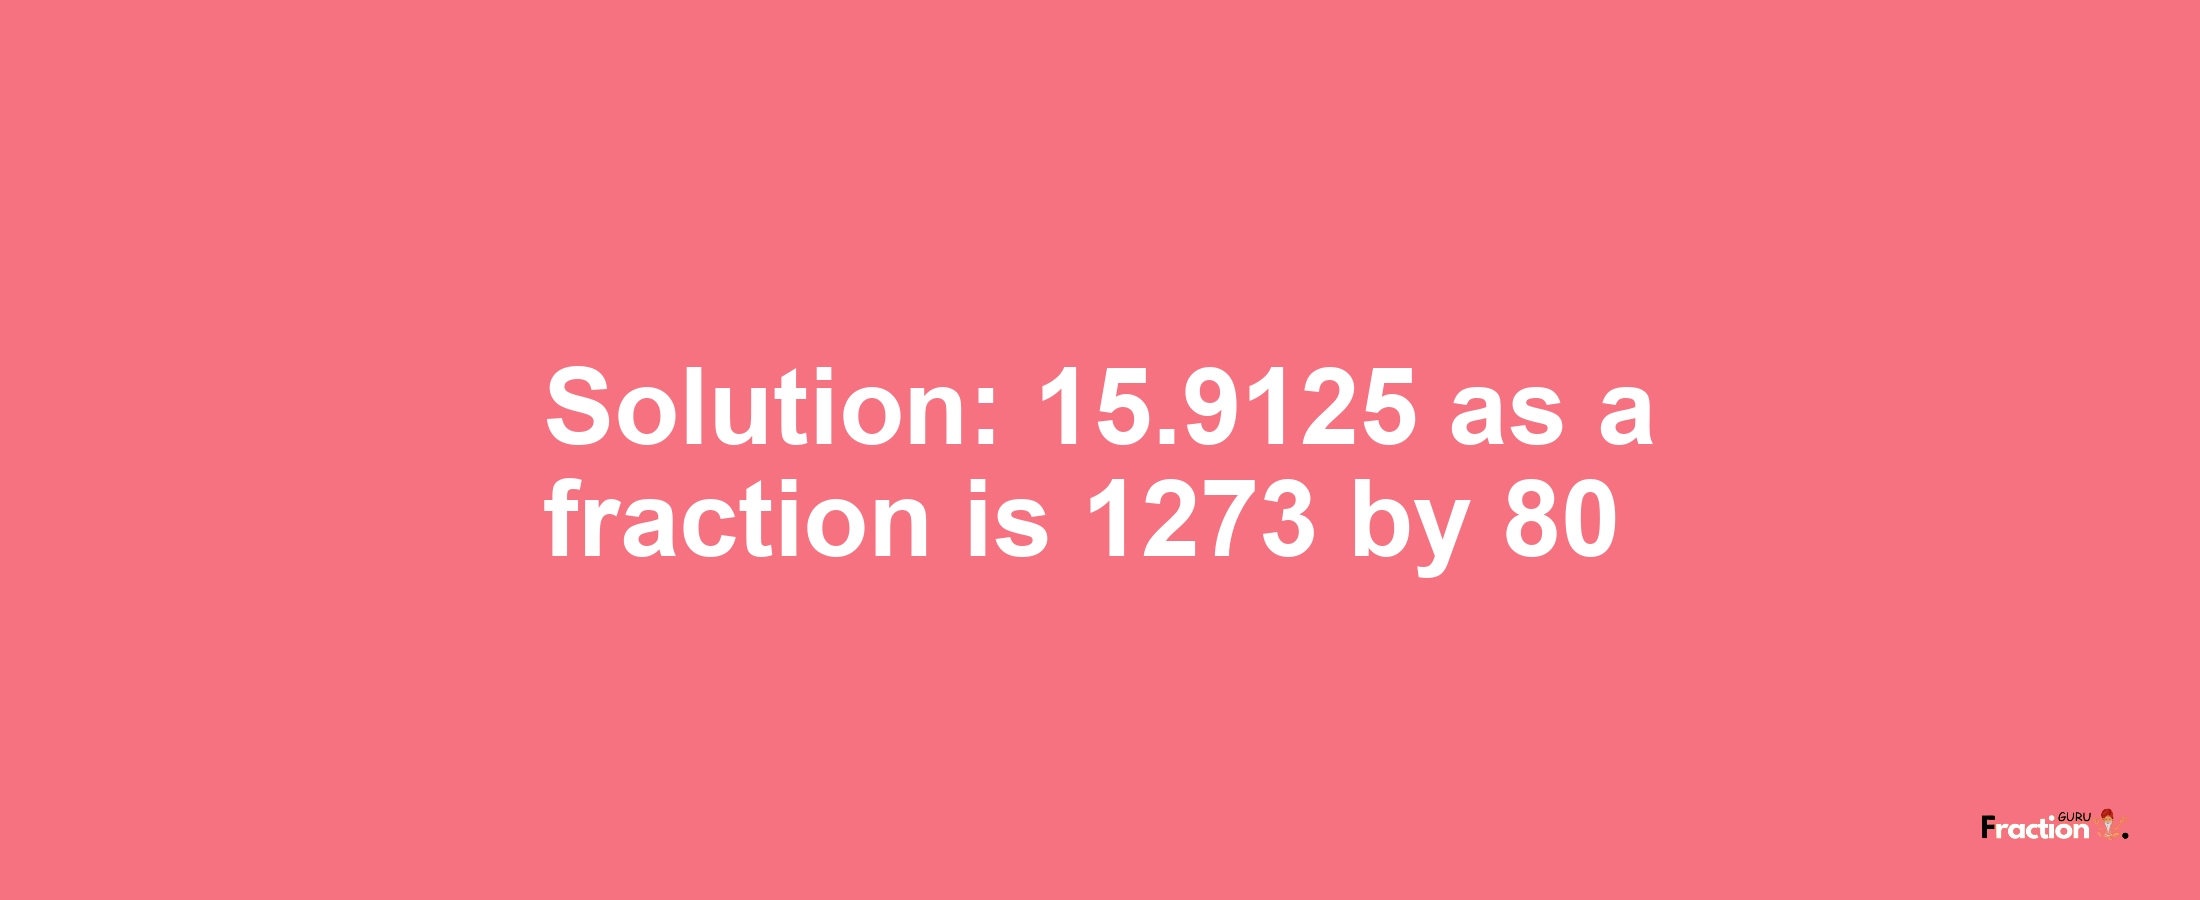 Solution:15.9125 as a fraction is 1273/80